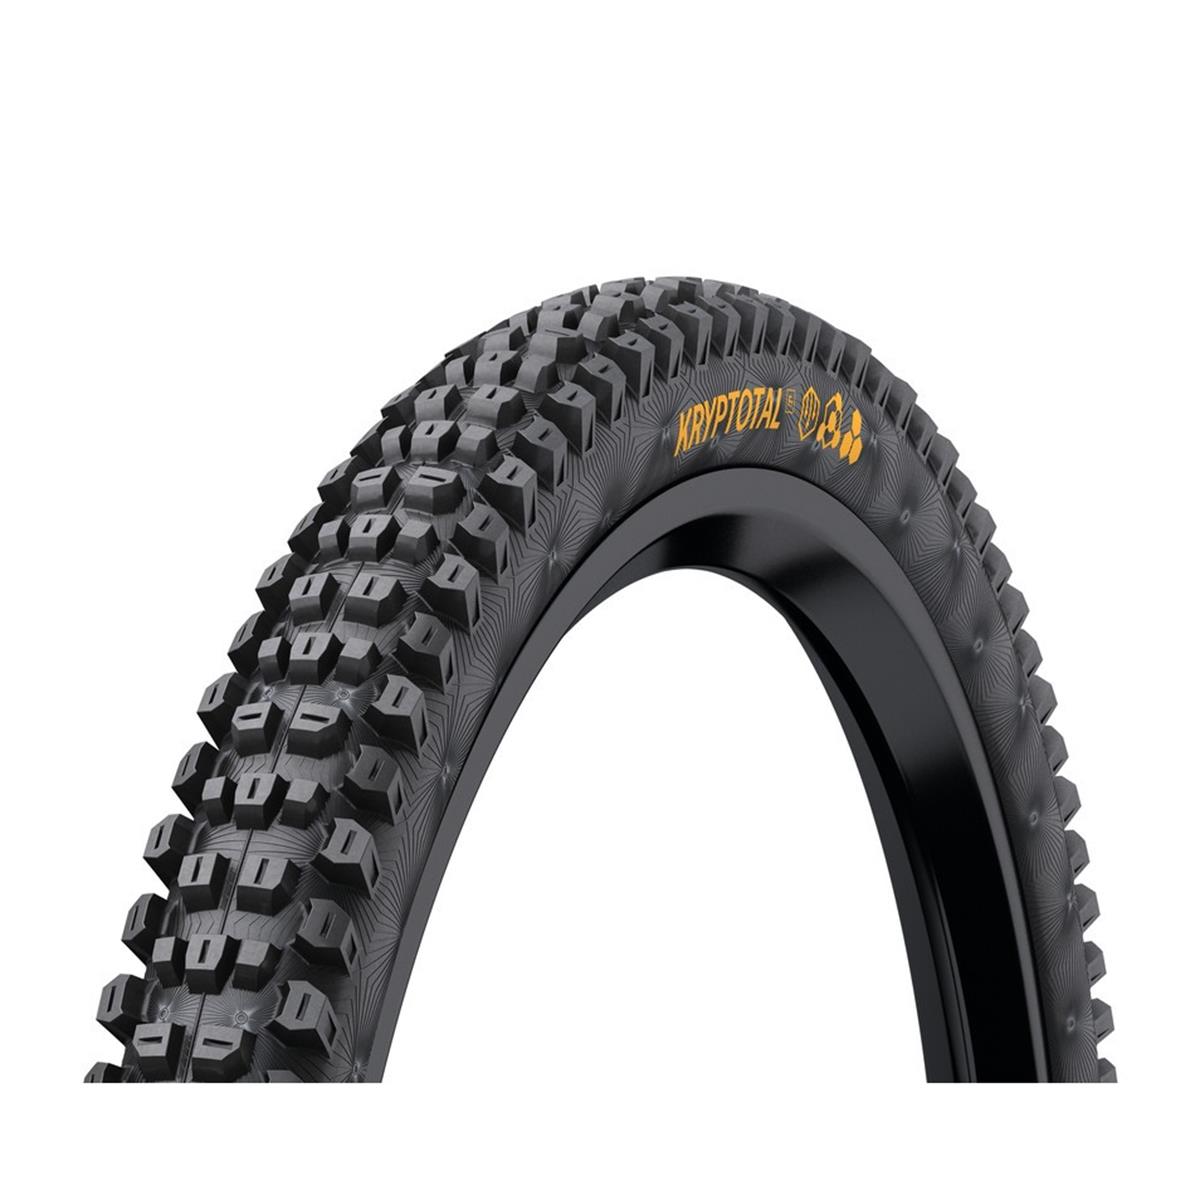 Continental MTB Tire Kryptotal Front Trail 29 x 2.4, Trail-Casing, Endurance-Compound, TR